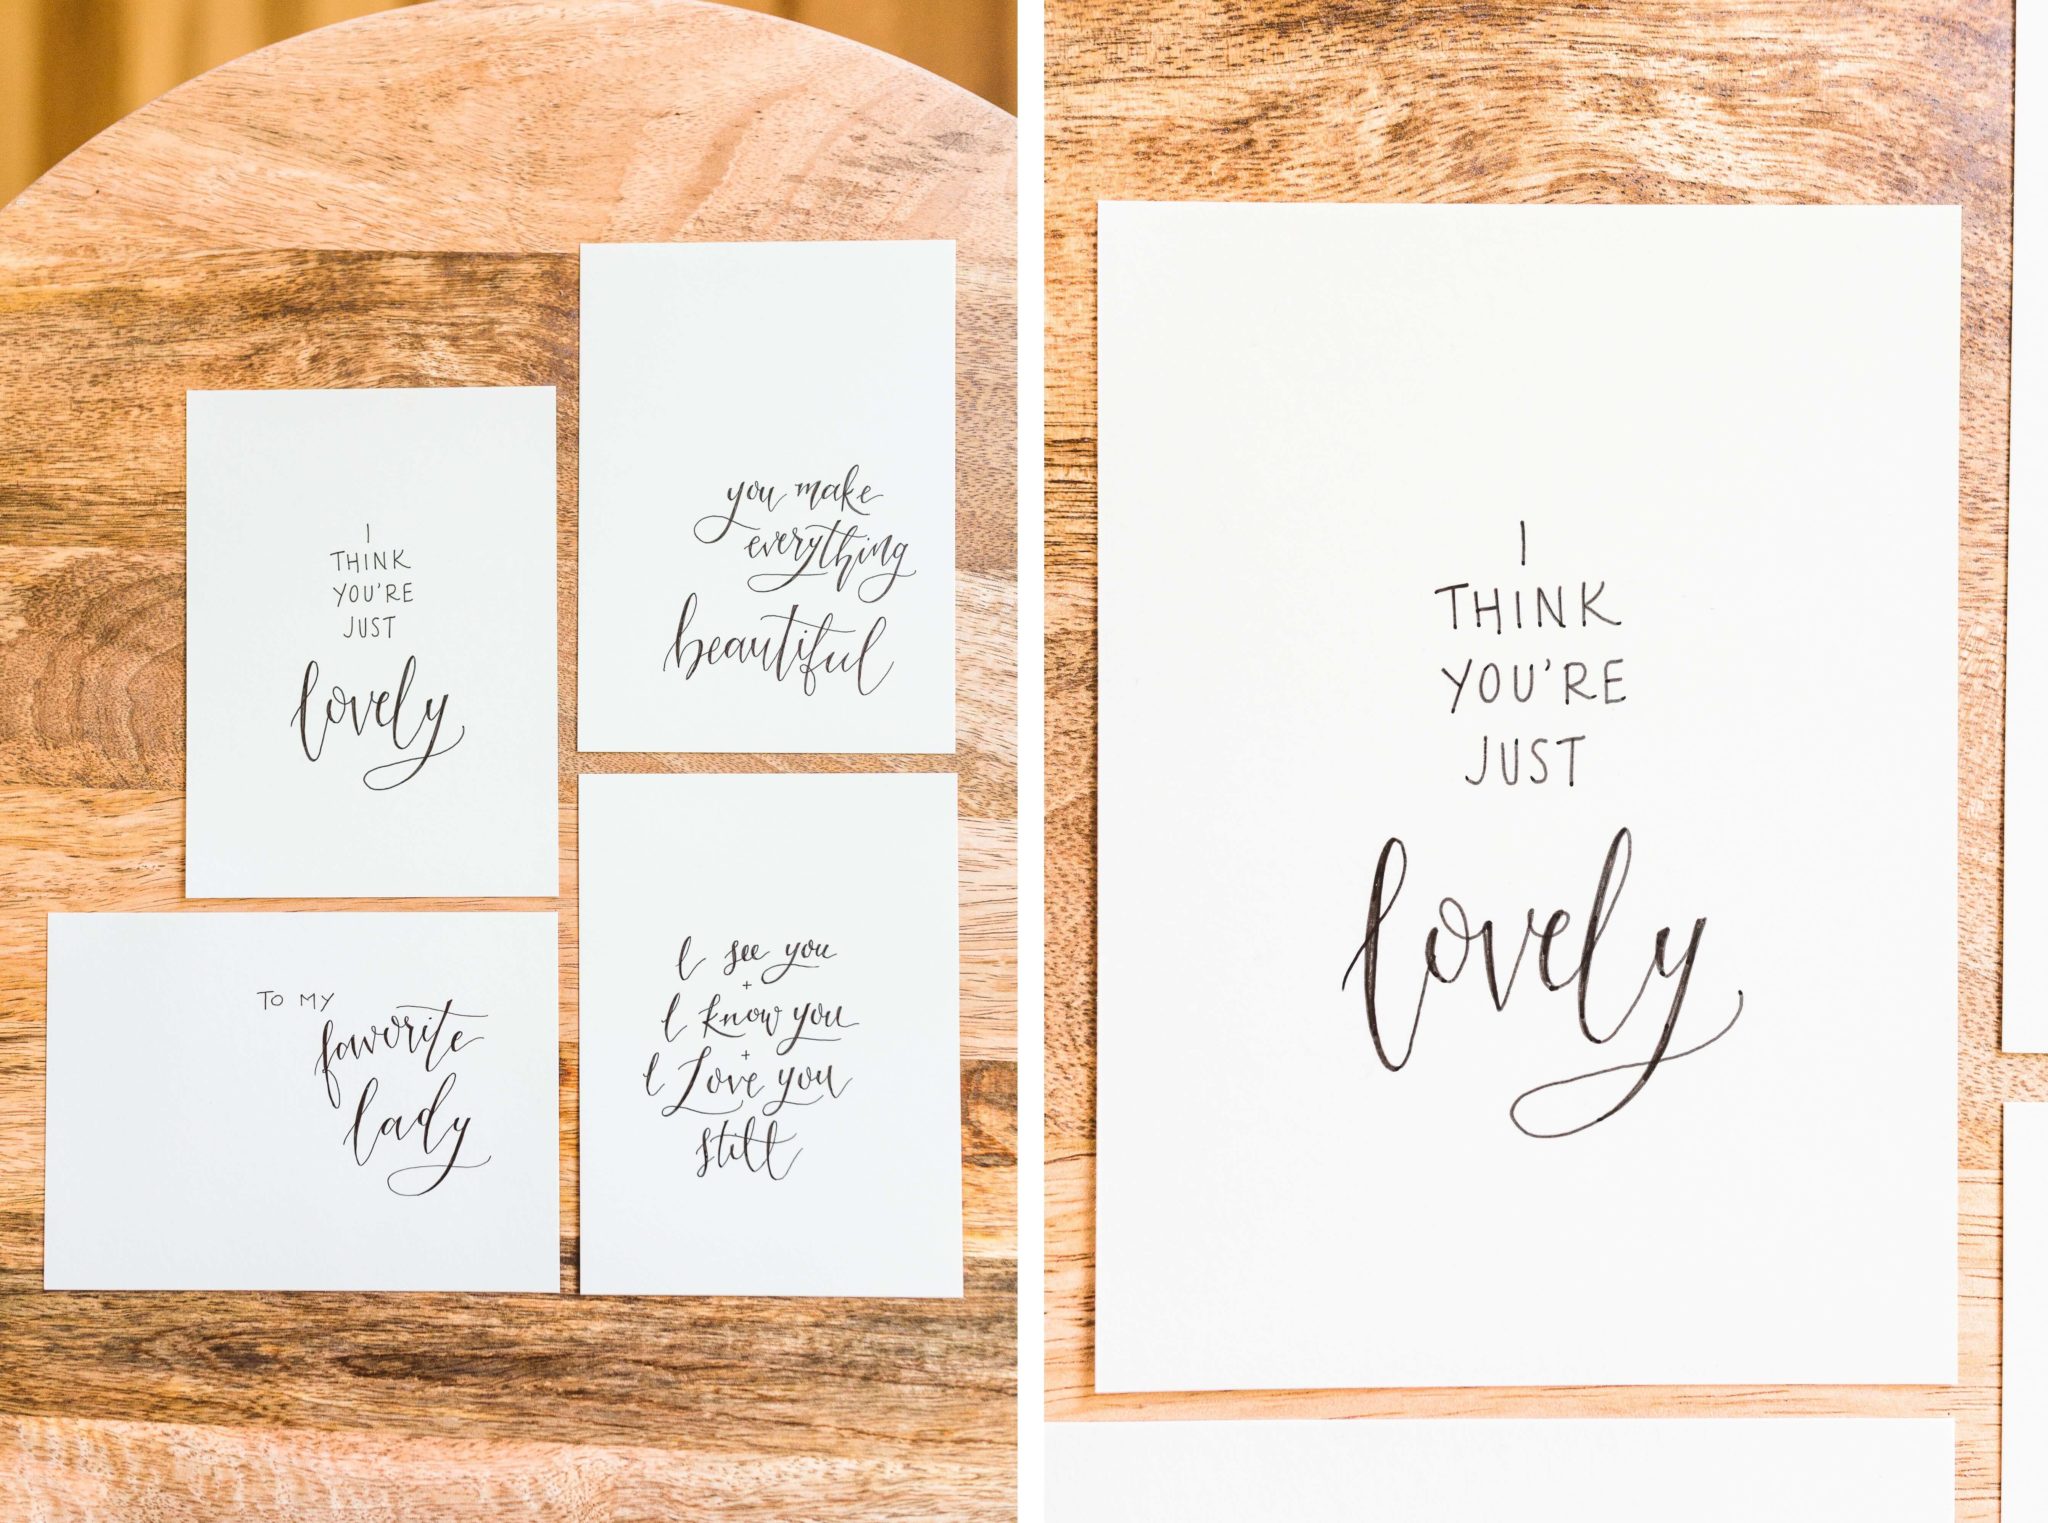 Hand written love notes lay on a wooden table. 